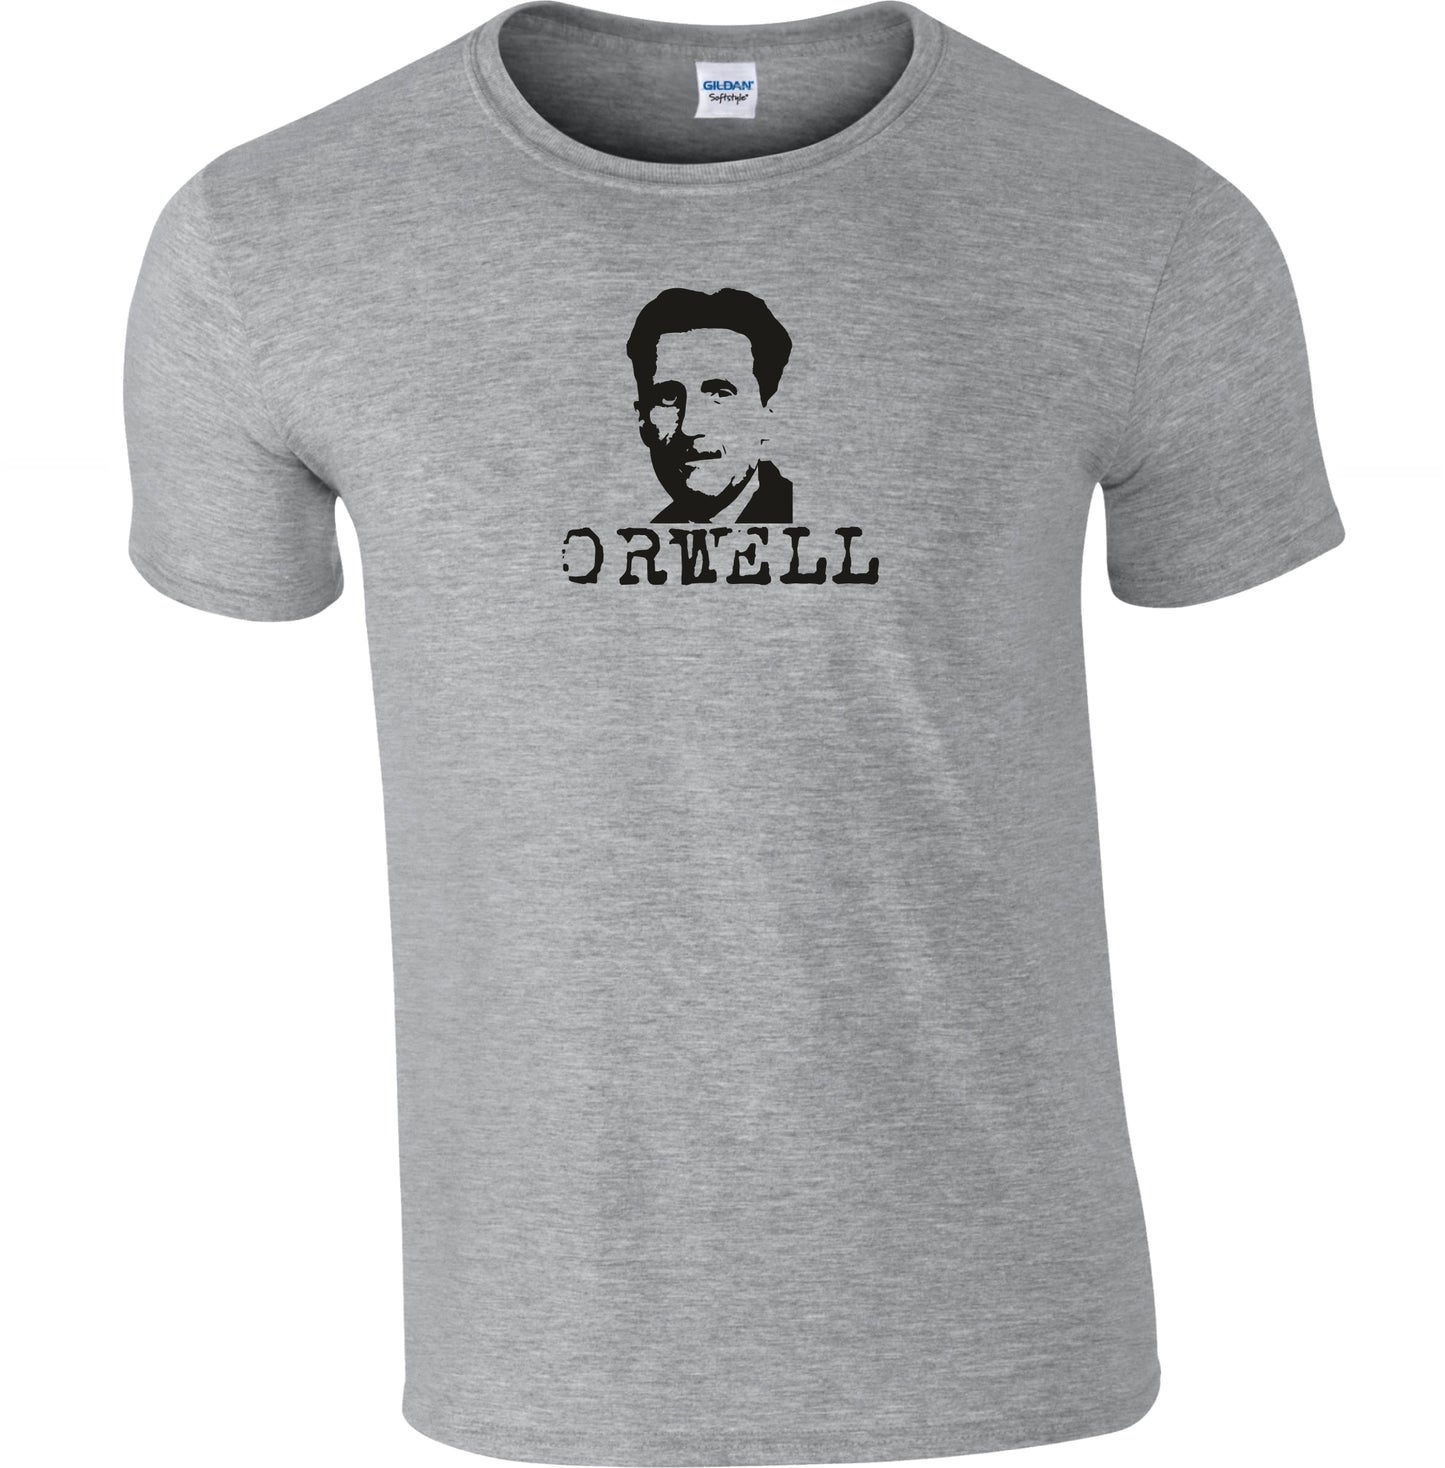 George Orwell T-shirt - 1984, Various Colour T Shirts, S-XXL